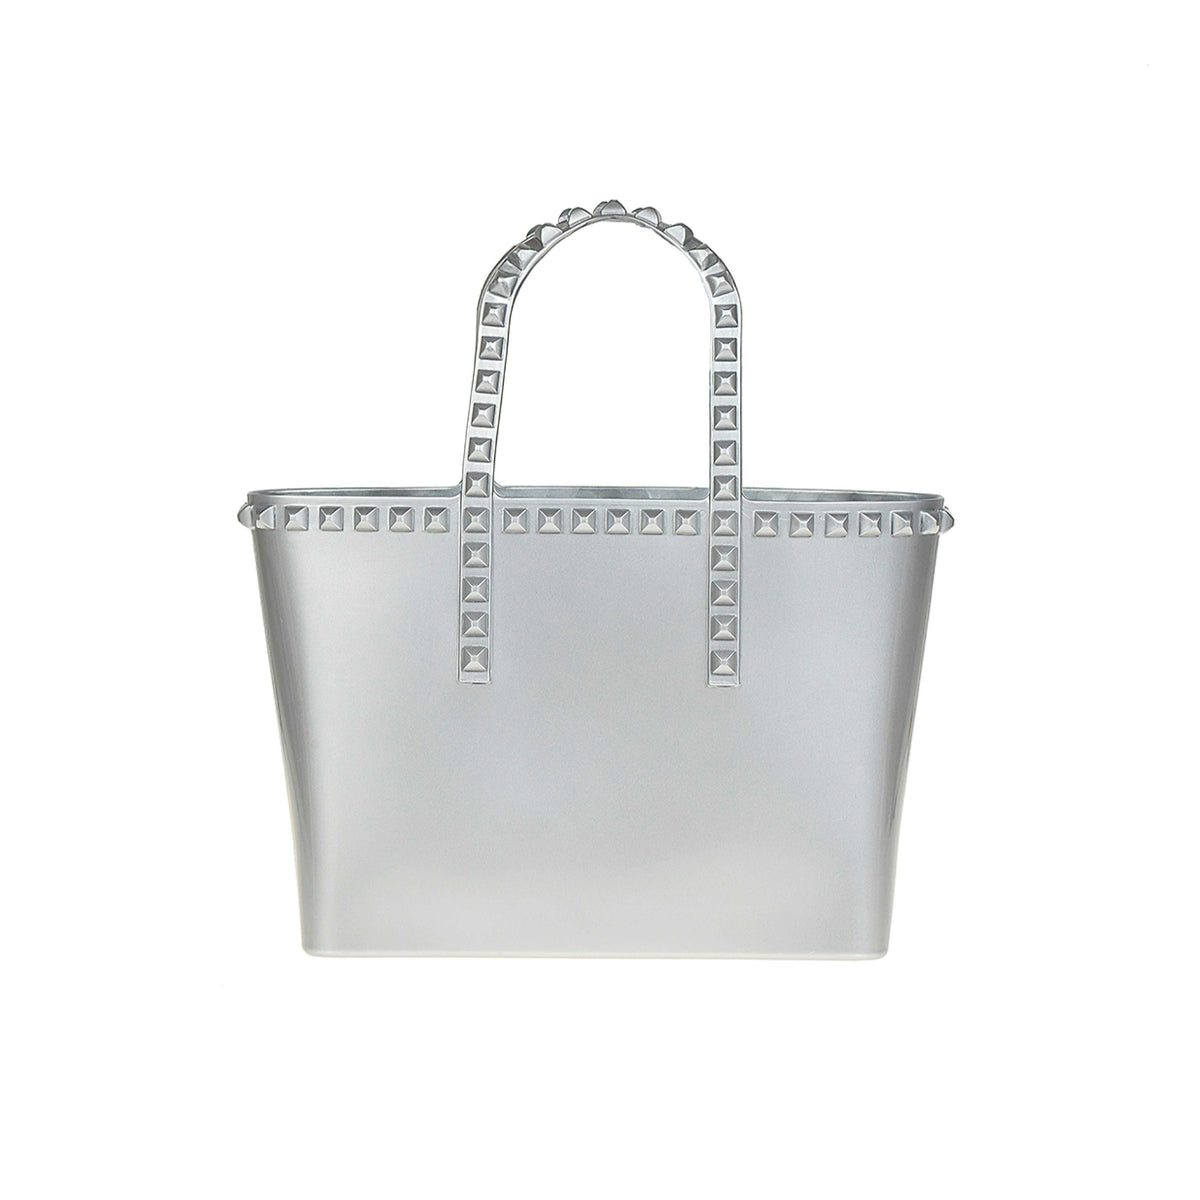 Mini studded jelly purse from Carmen Sol in color silver